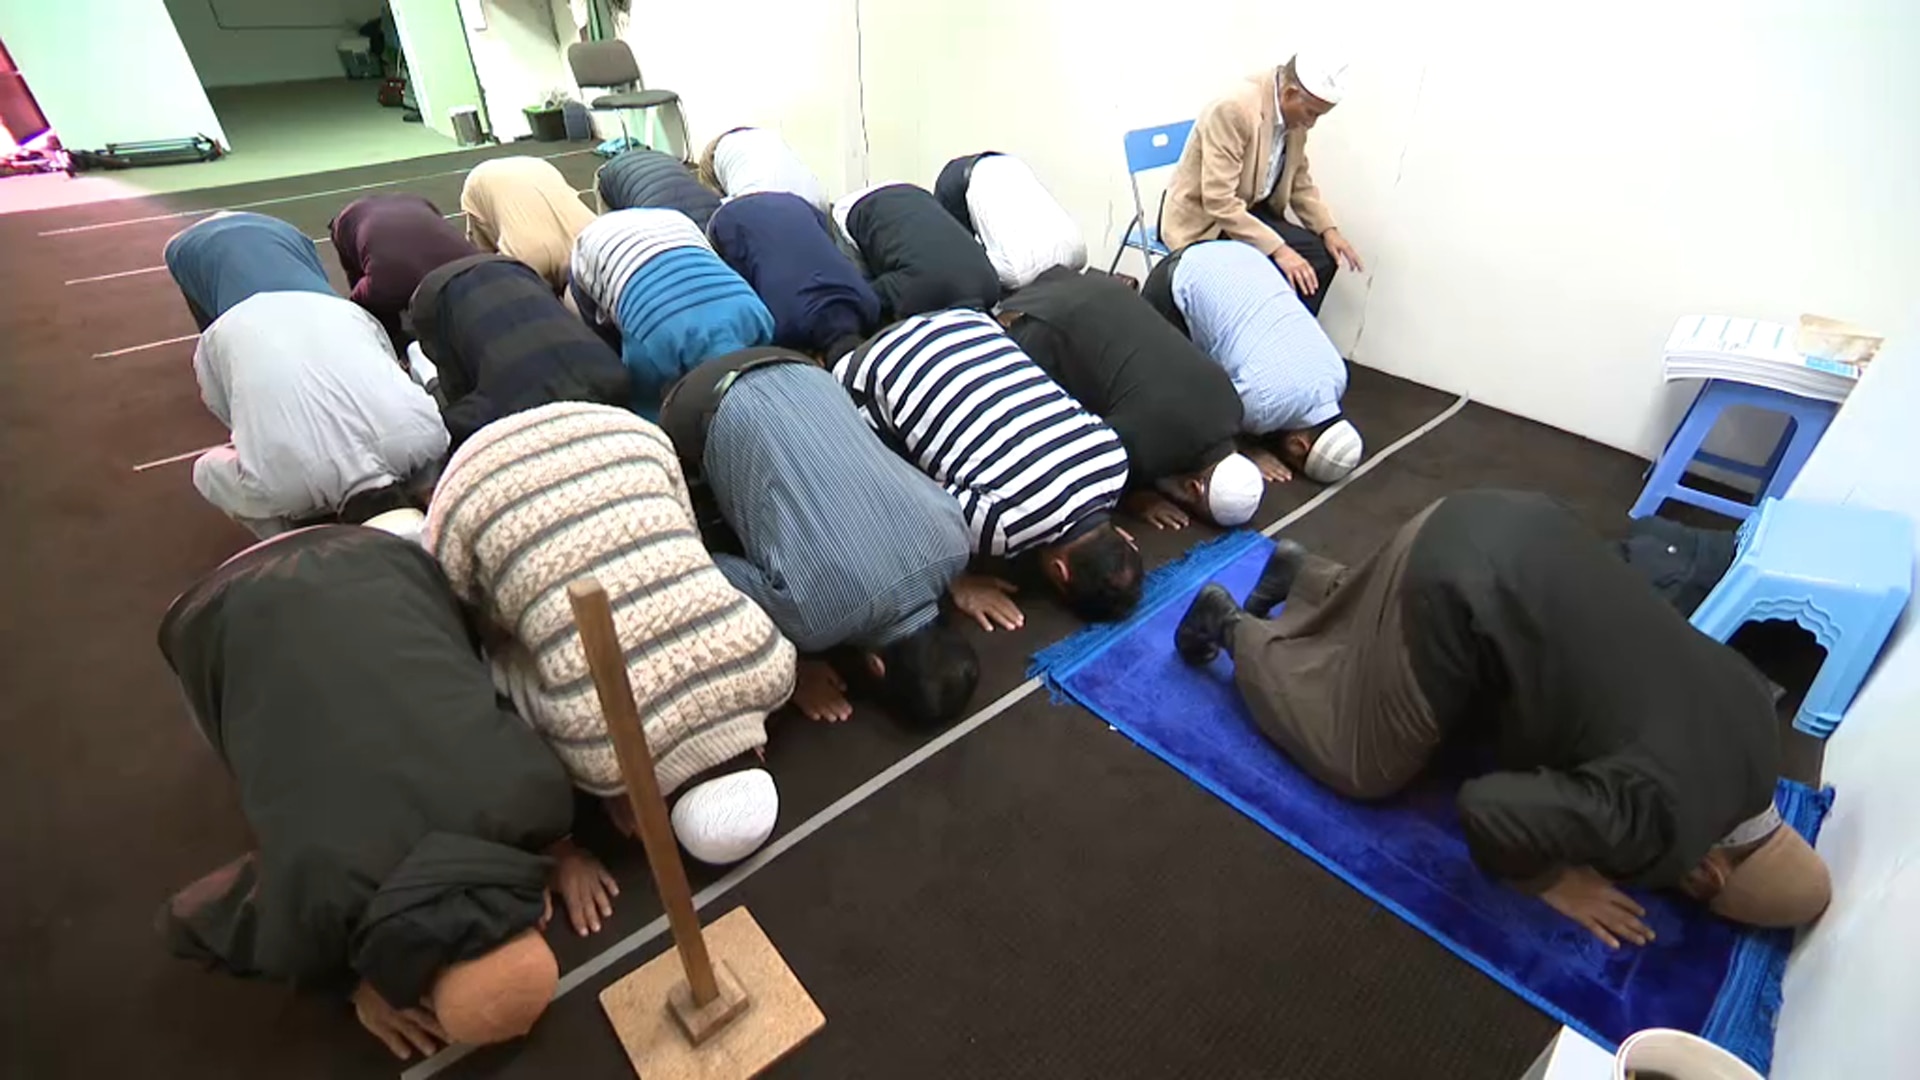 A makeshift prayer room at the back of an inner Sydney convenience store.